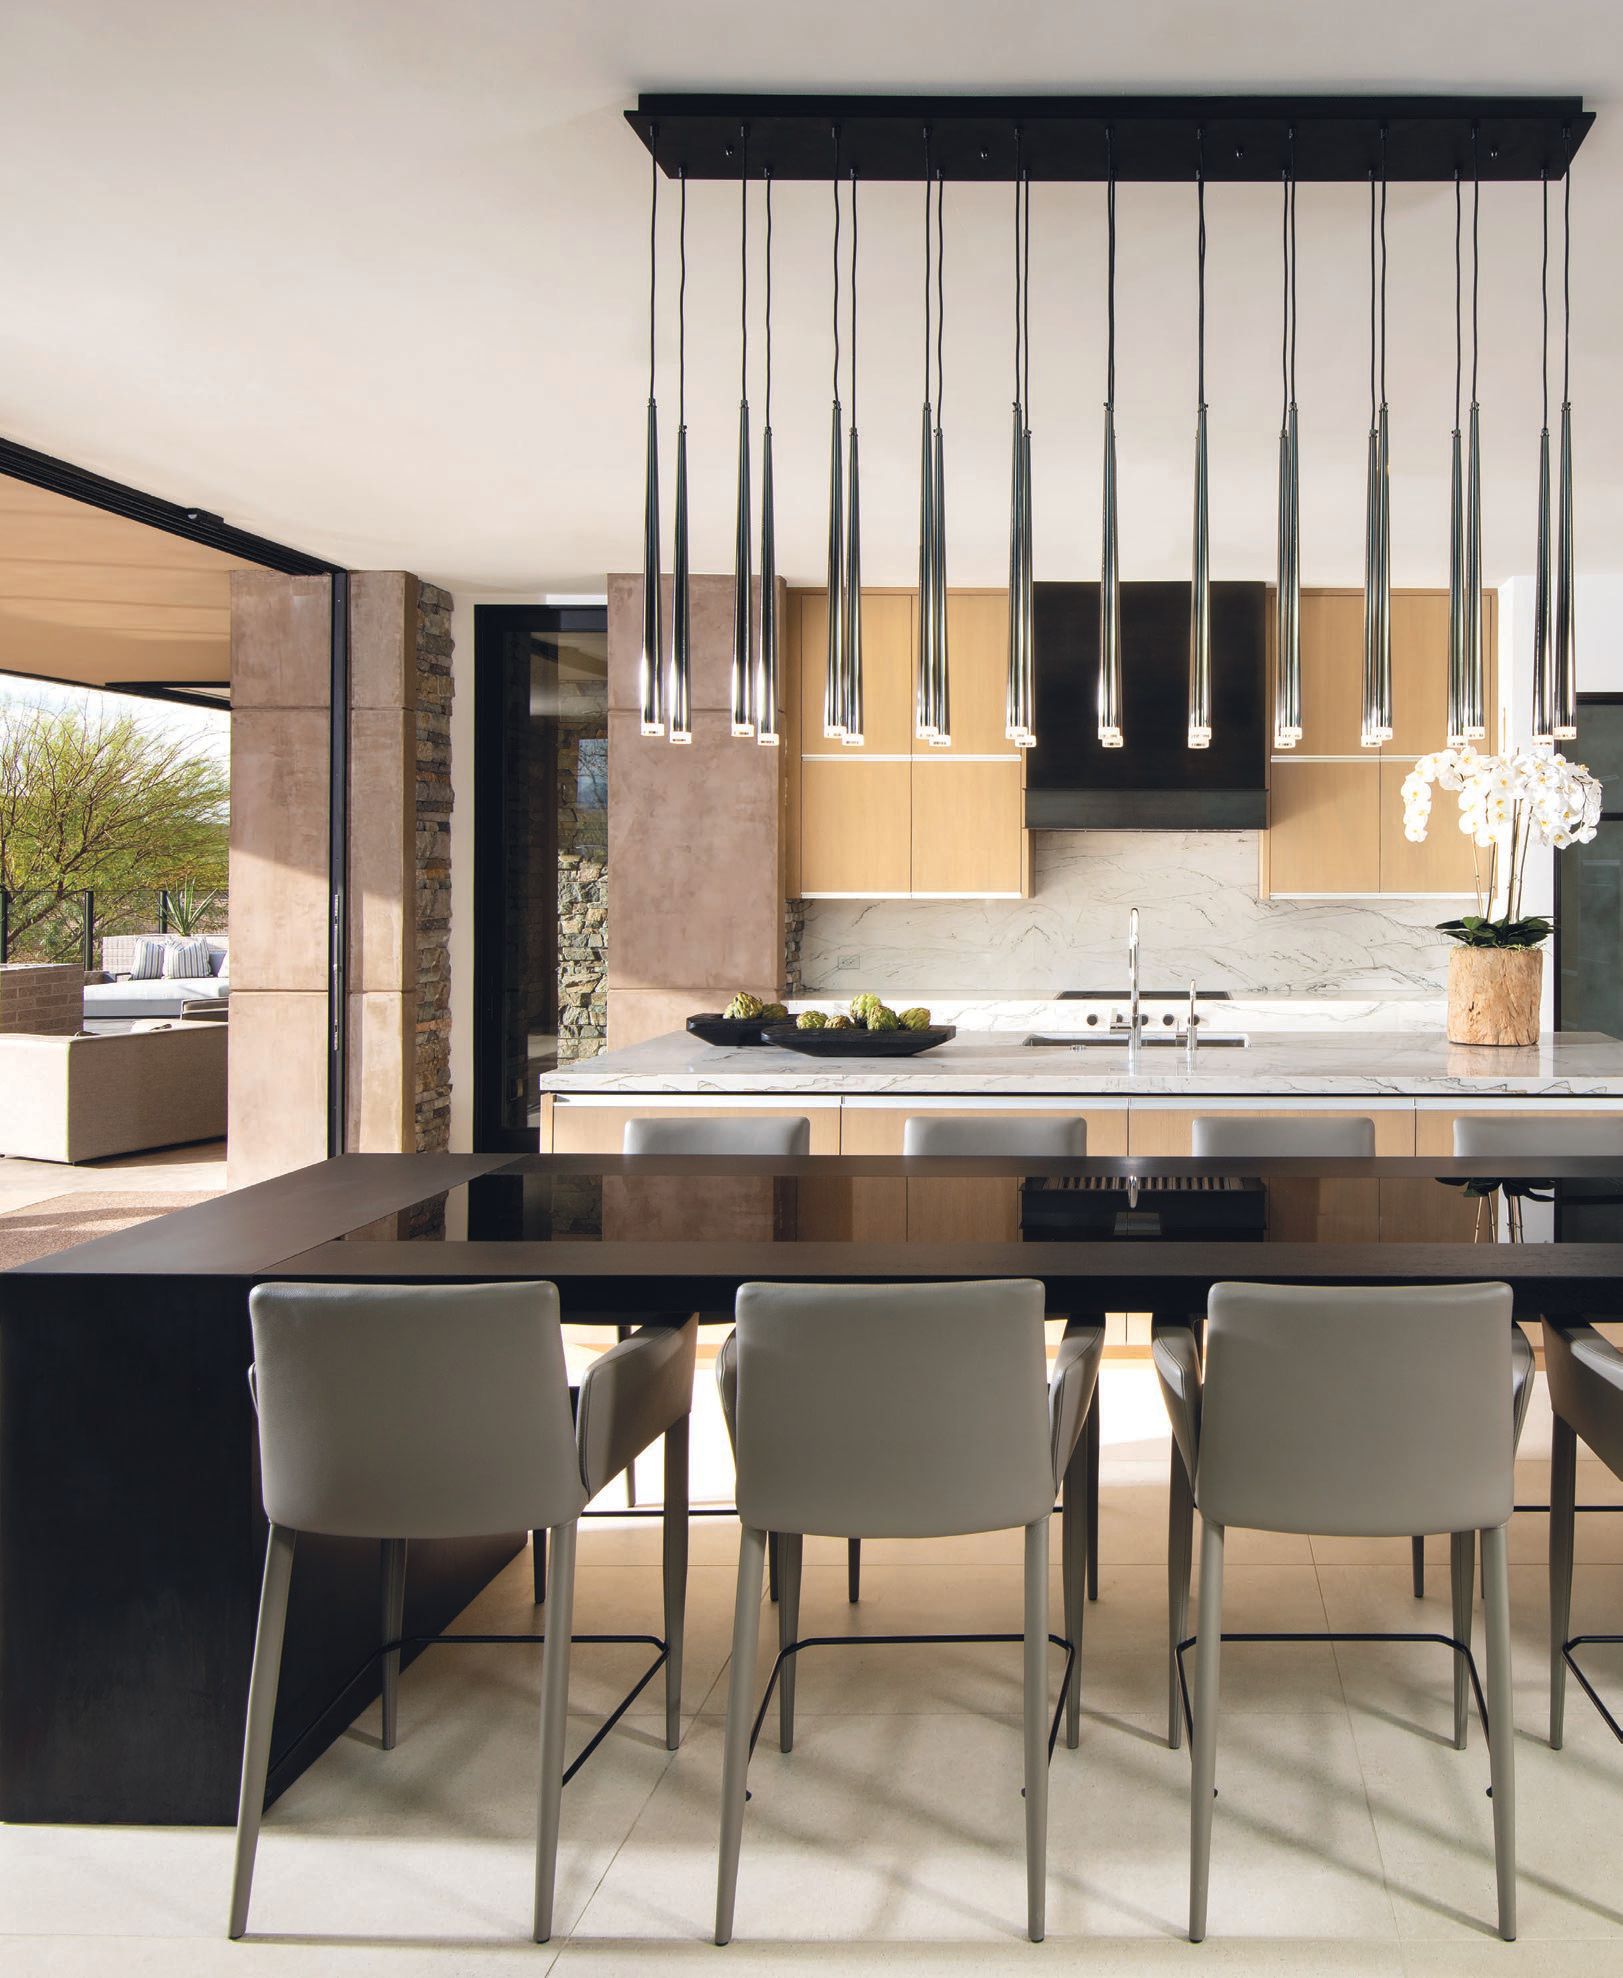 “One of our favorite pieces in this kitchen besides the timeless material palette is the custom-made dining table,” says Ownby. “This table is made of a triple-burnt live-edge wood slab that is channeled with smoke glass down the middle. A chandelier by Tech Lighting makes a major statement. PHOTO BY DINO TONN